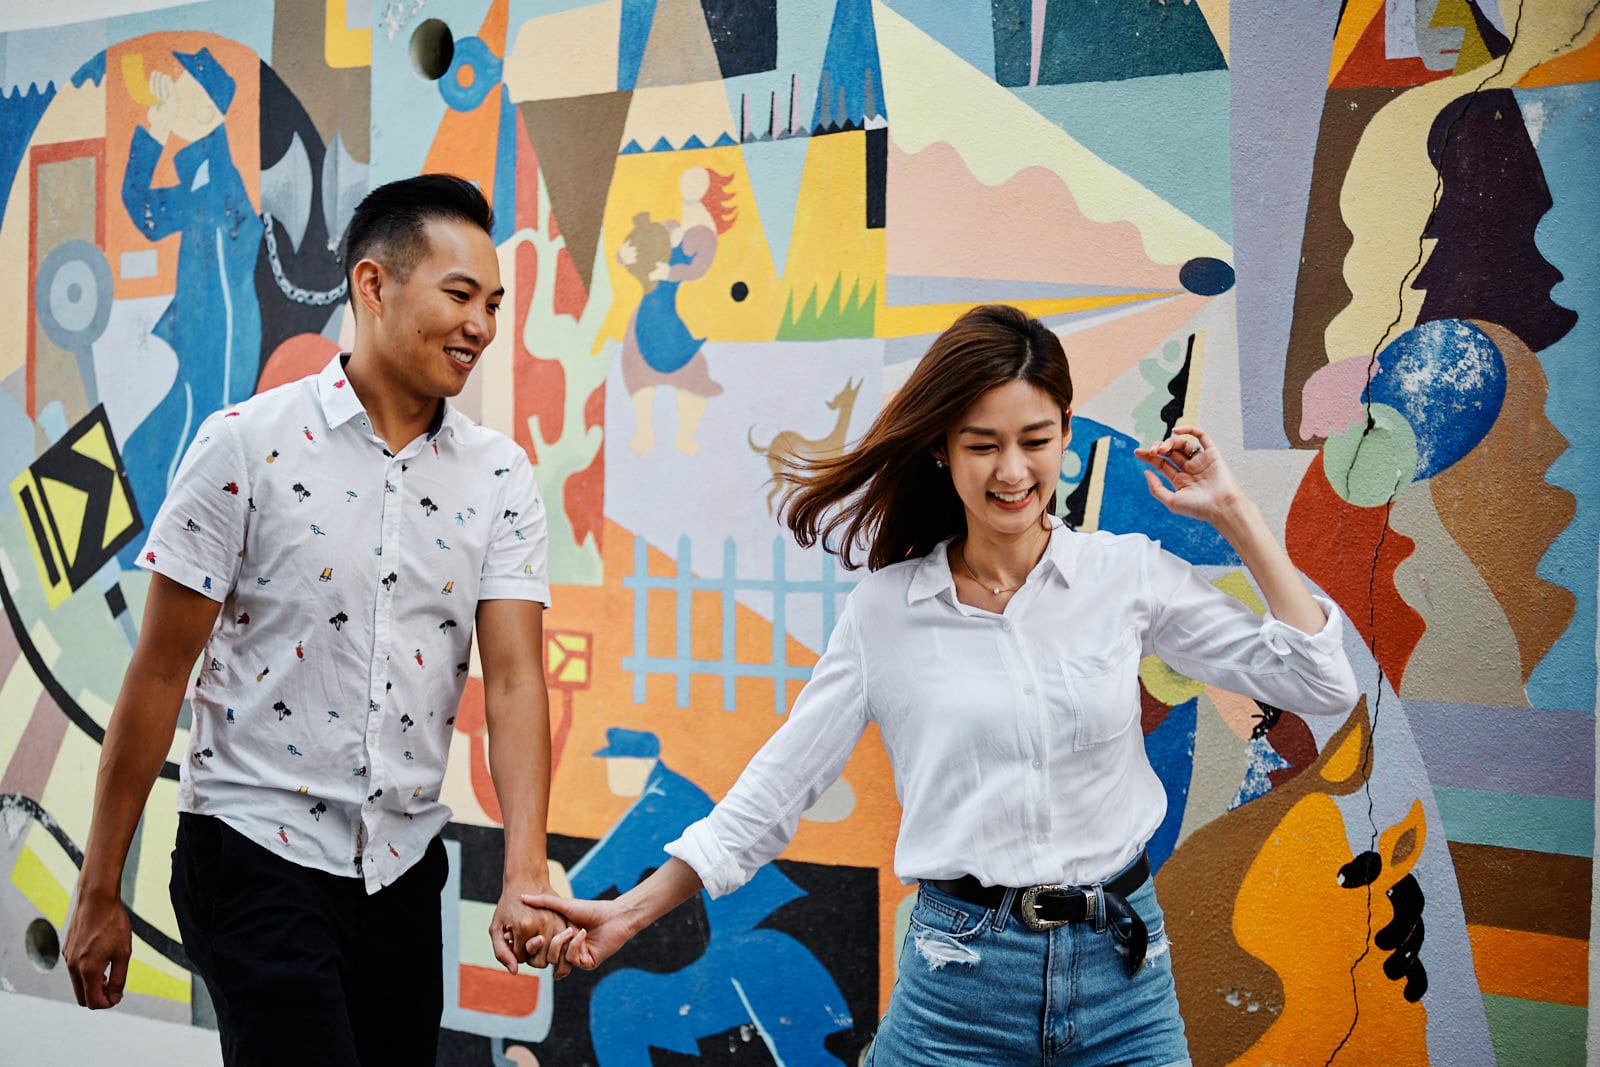 Eliza Sam and her husband walk in front of a piece of street art in the Mouraria neighbourhood in Lisbon, as part of a shoot with Lisbon photographers Your Story in Photos